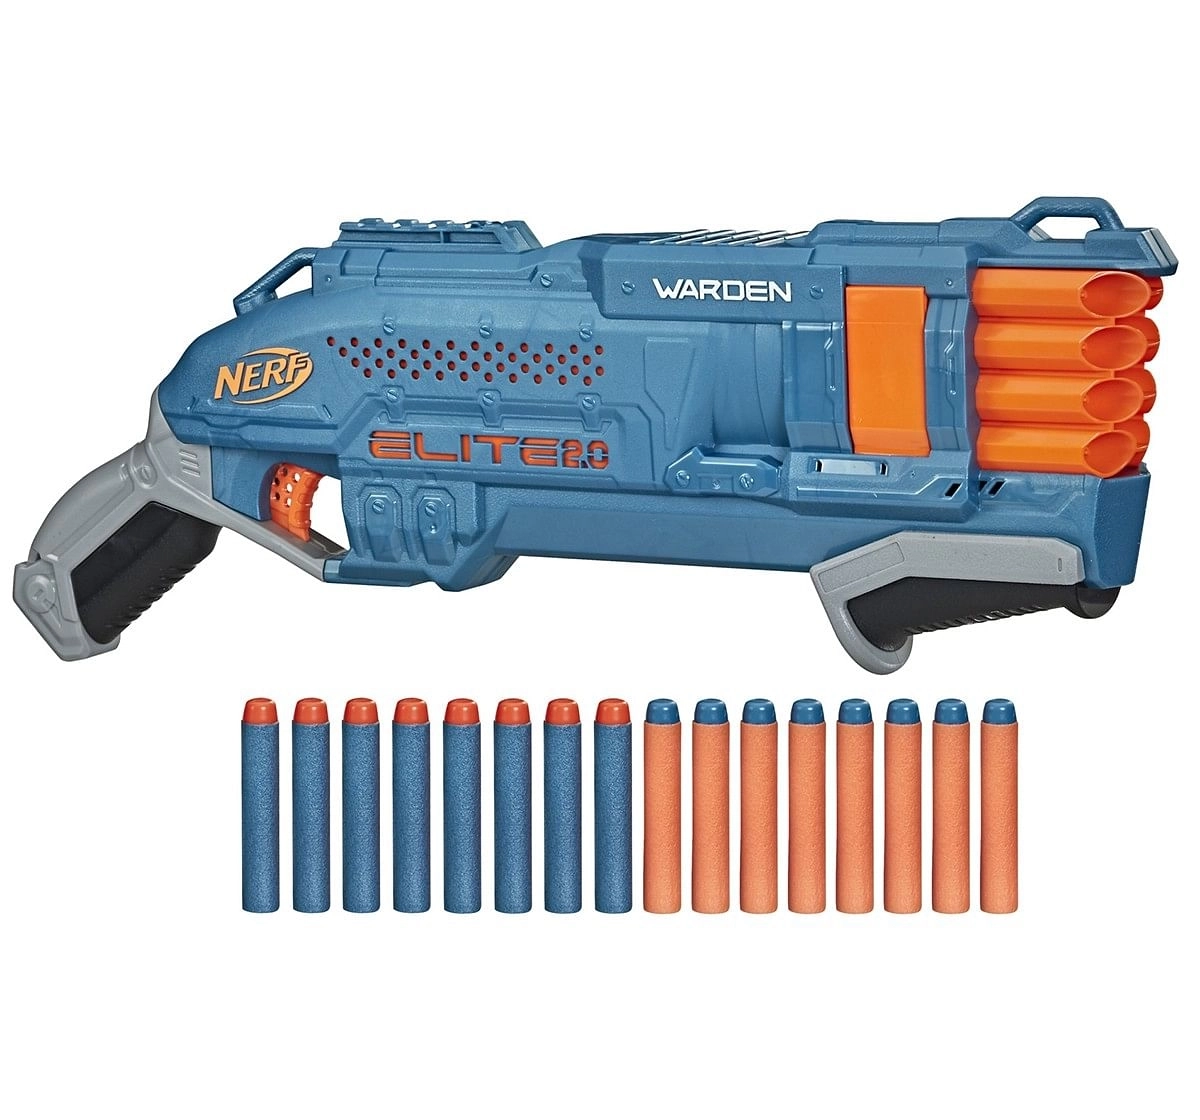 NERF Elite 2.0 Warden DB-8 Blaster Tactical Rail For Customizing Capability, Multicolor, 8Y+ 